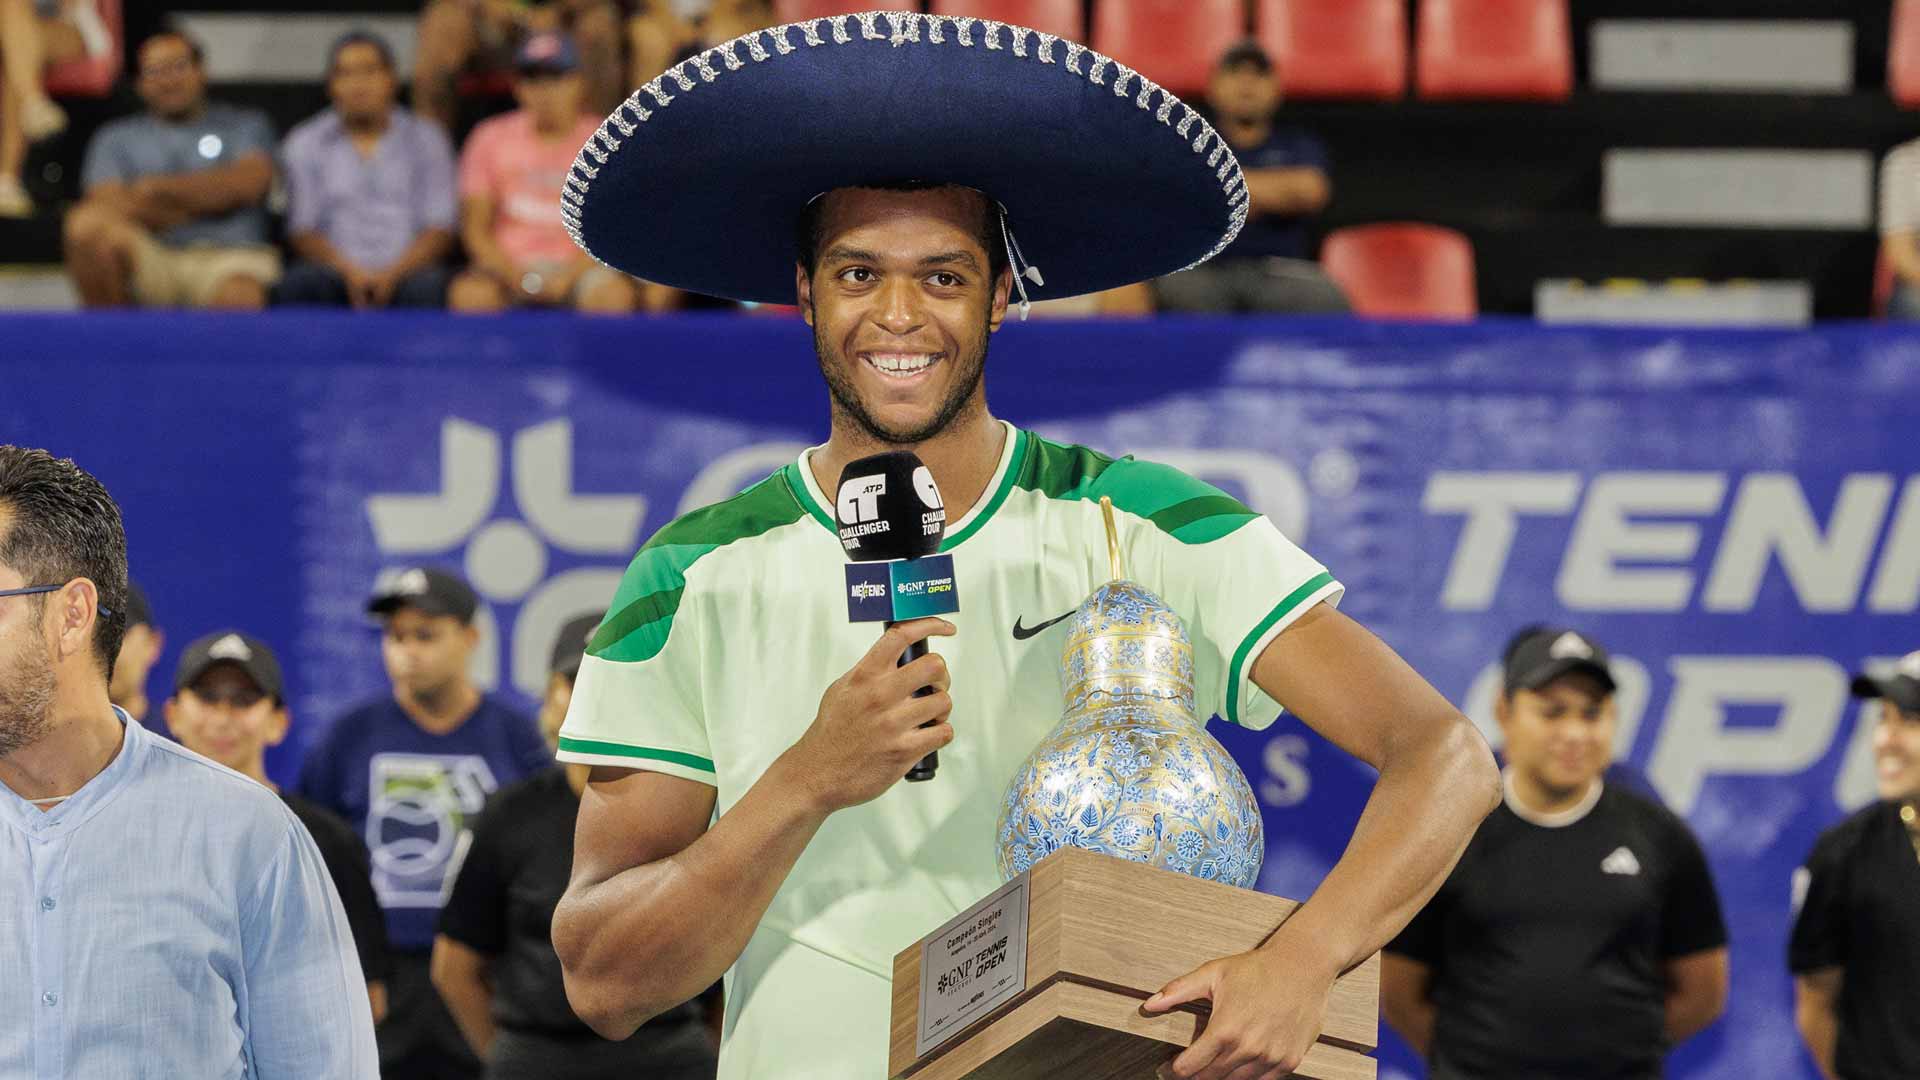 <a href='https://www.atptour.com/en/players/giovanni-mpetshi-perricard/m0gz/overview'>Giovanni Mpetshi Perricard</a> triumphs at the Acapulco Challenger.